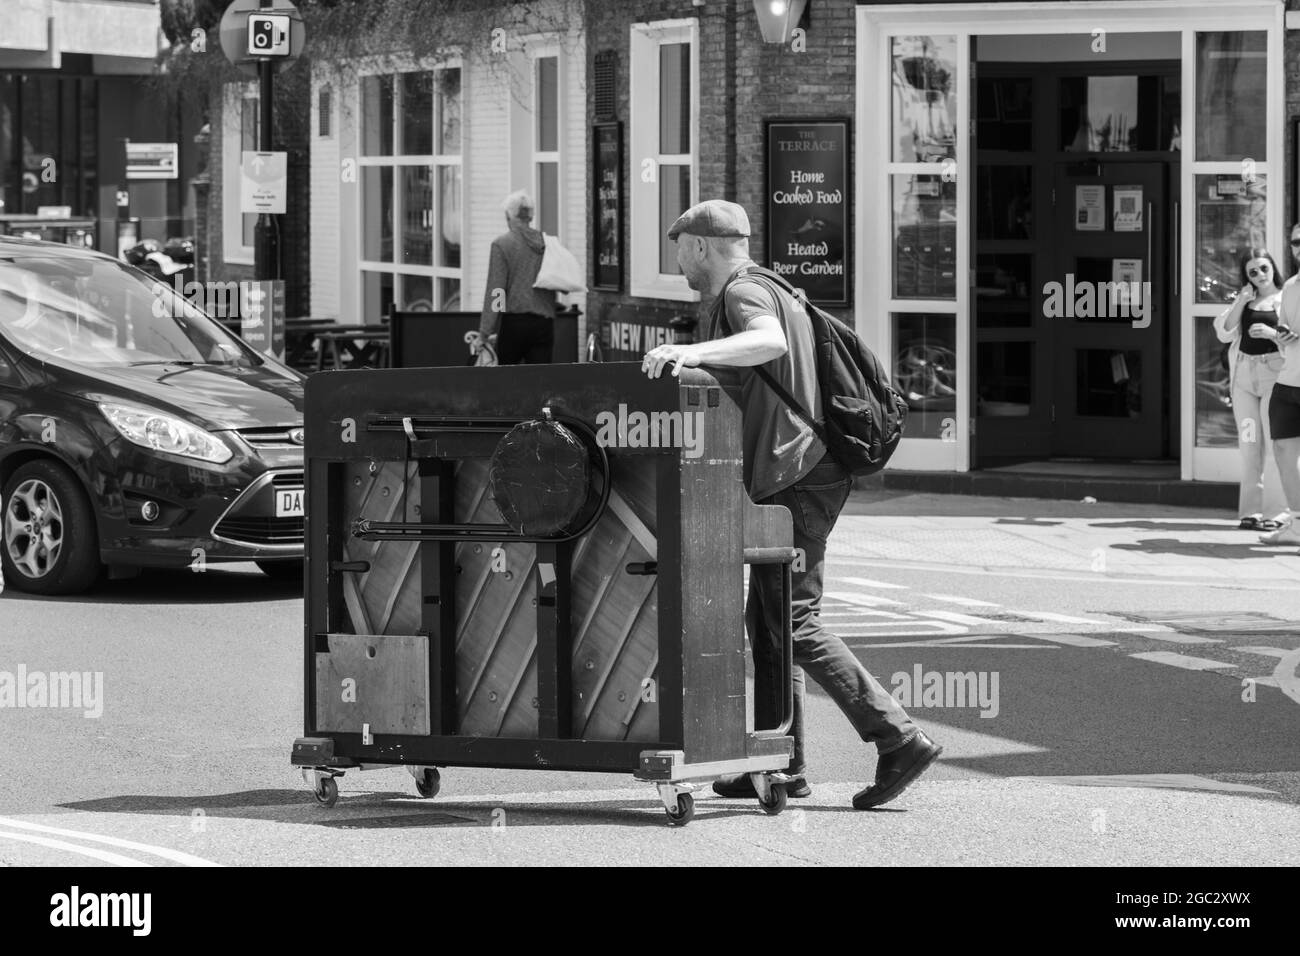 York's city centre features a piano being pushed down the street by a street performer, York, North Yorkshire, England, UK. Stock Photo